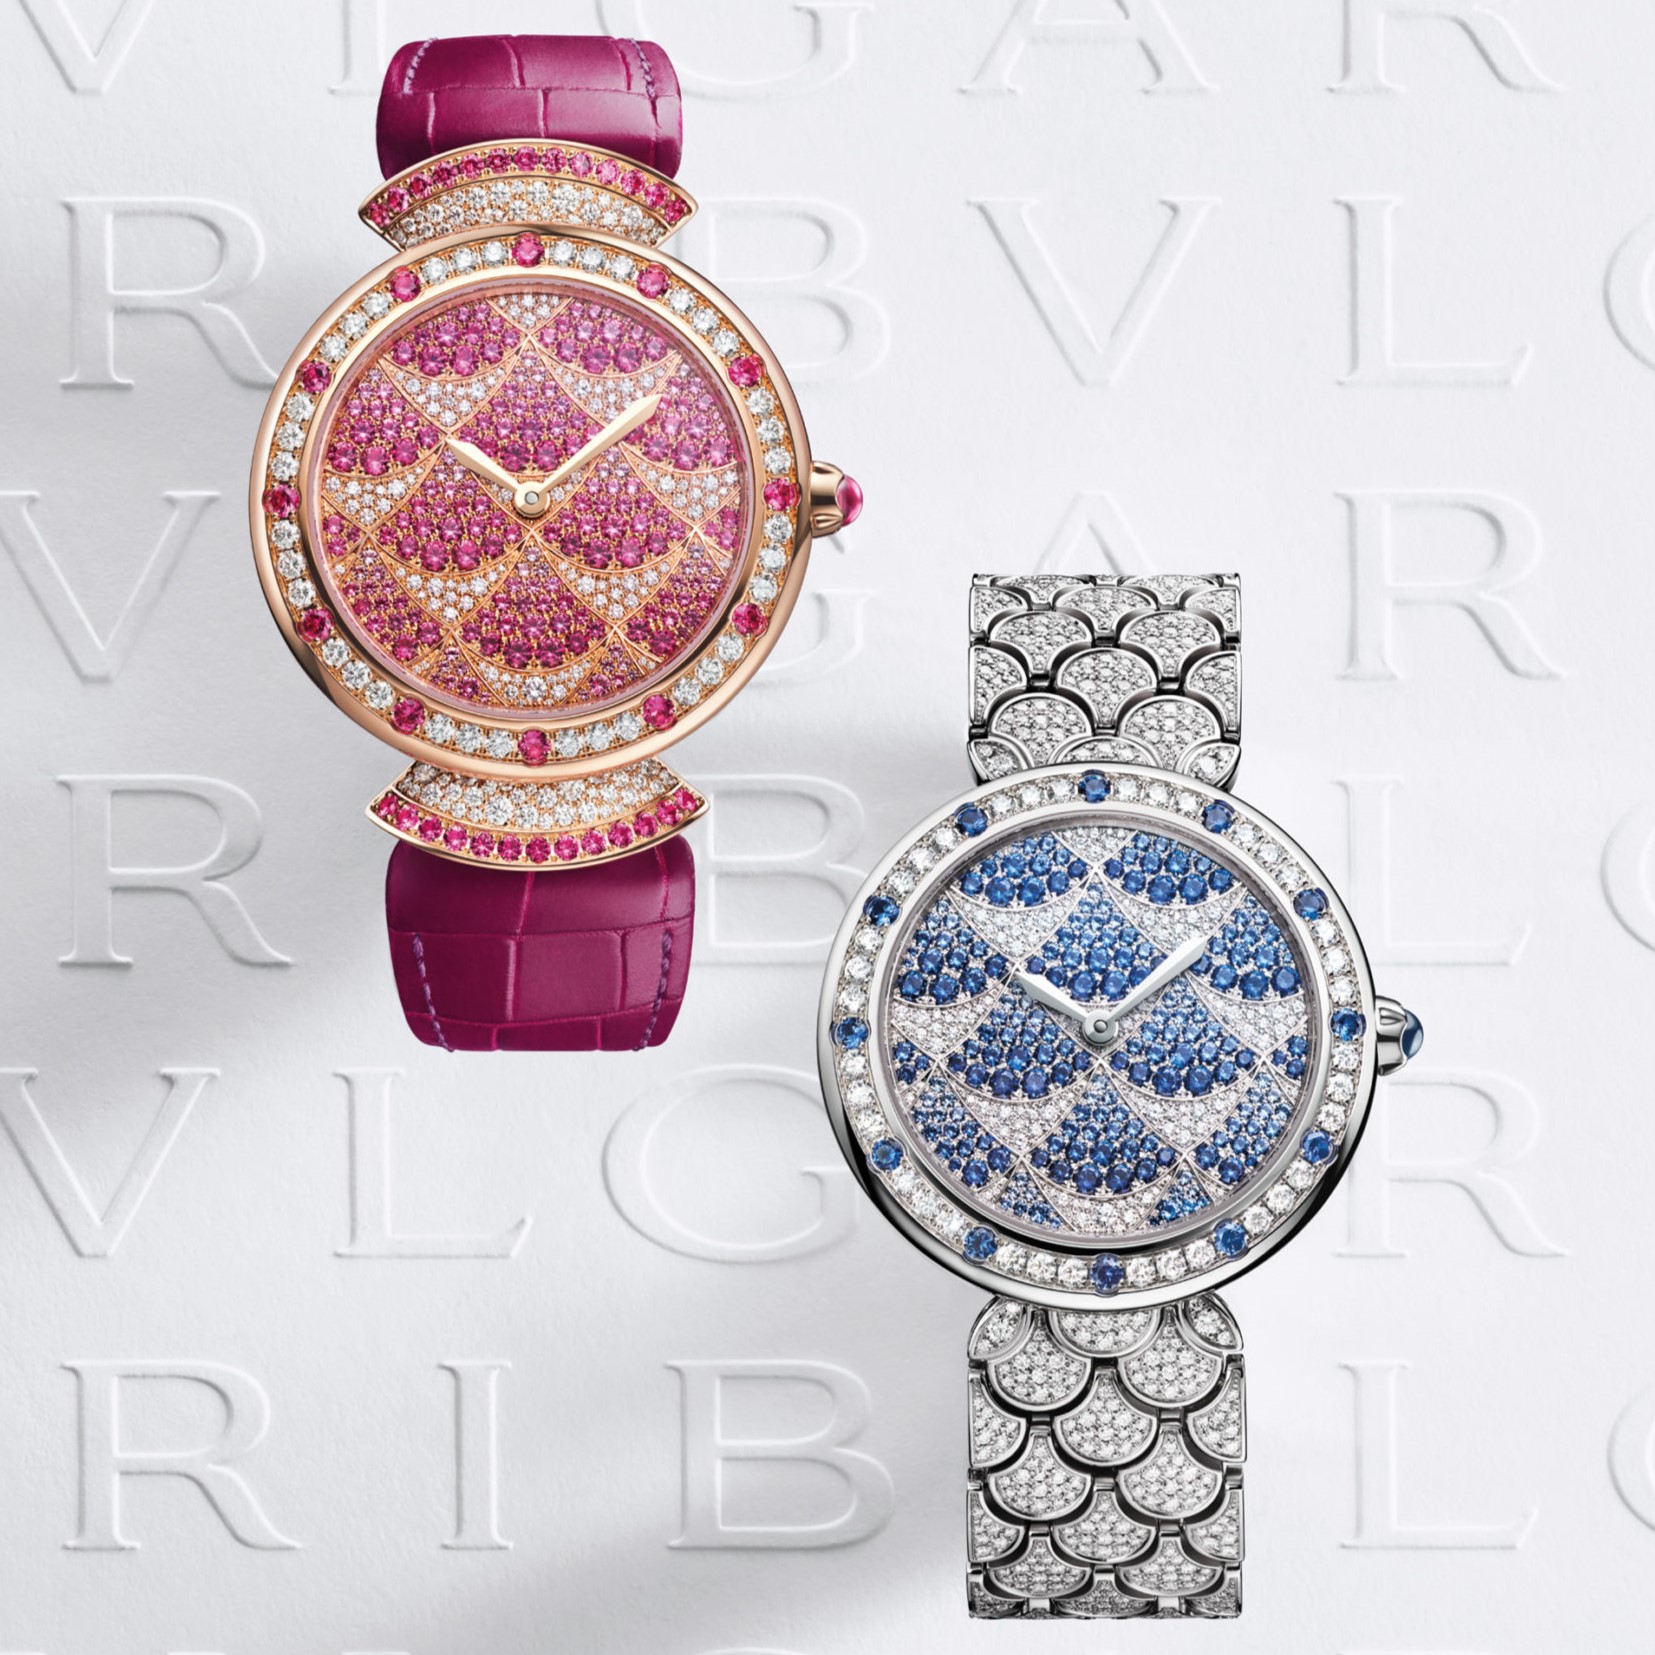 A Festival of Precious Colors Bulgari Introduces High Jewelry Watches